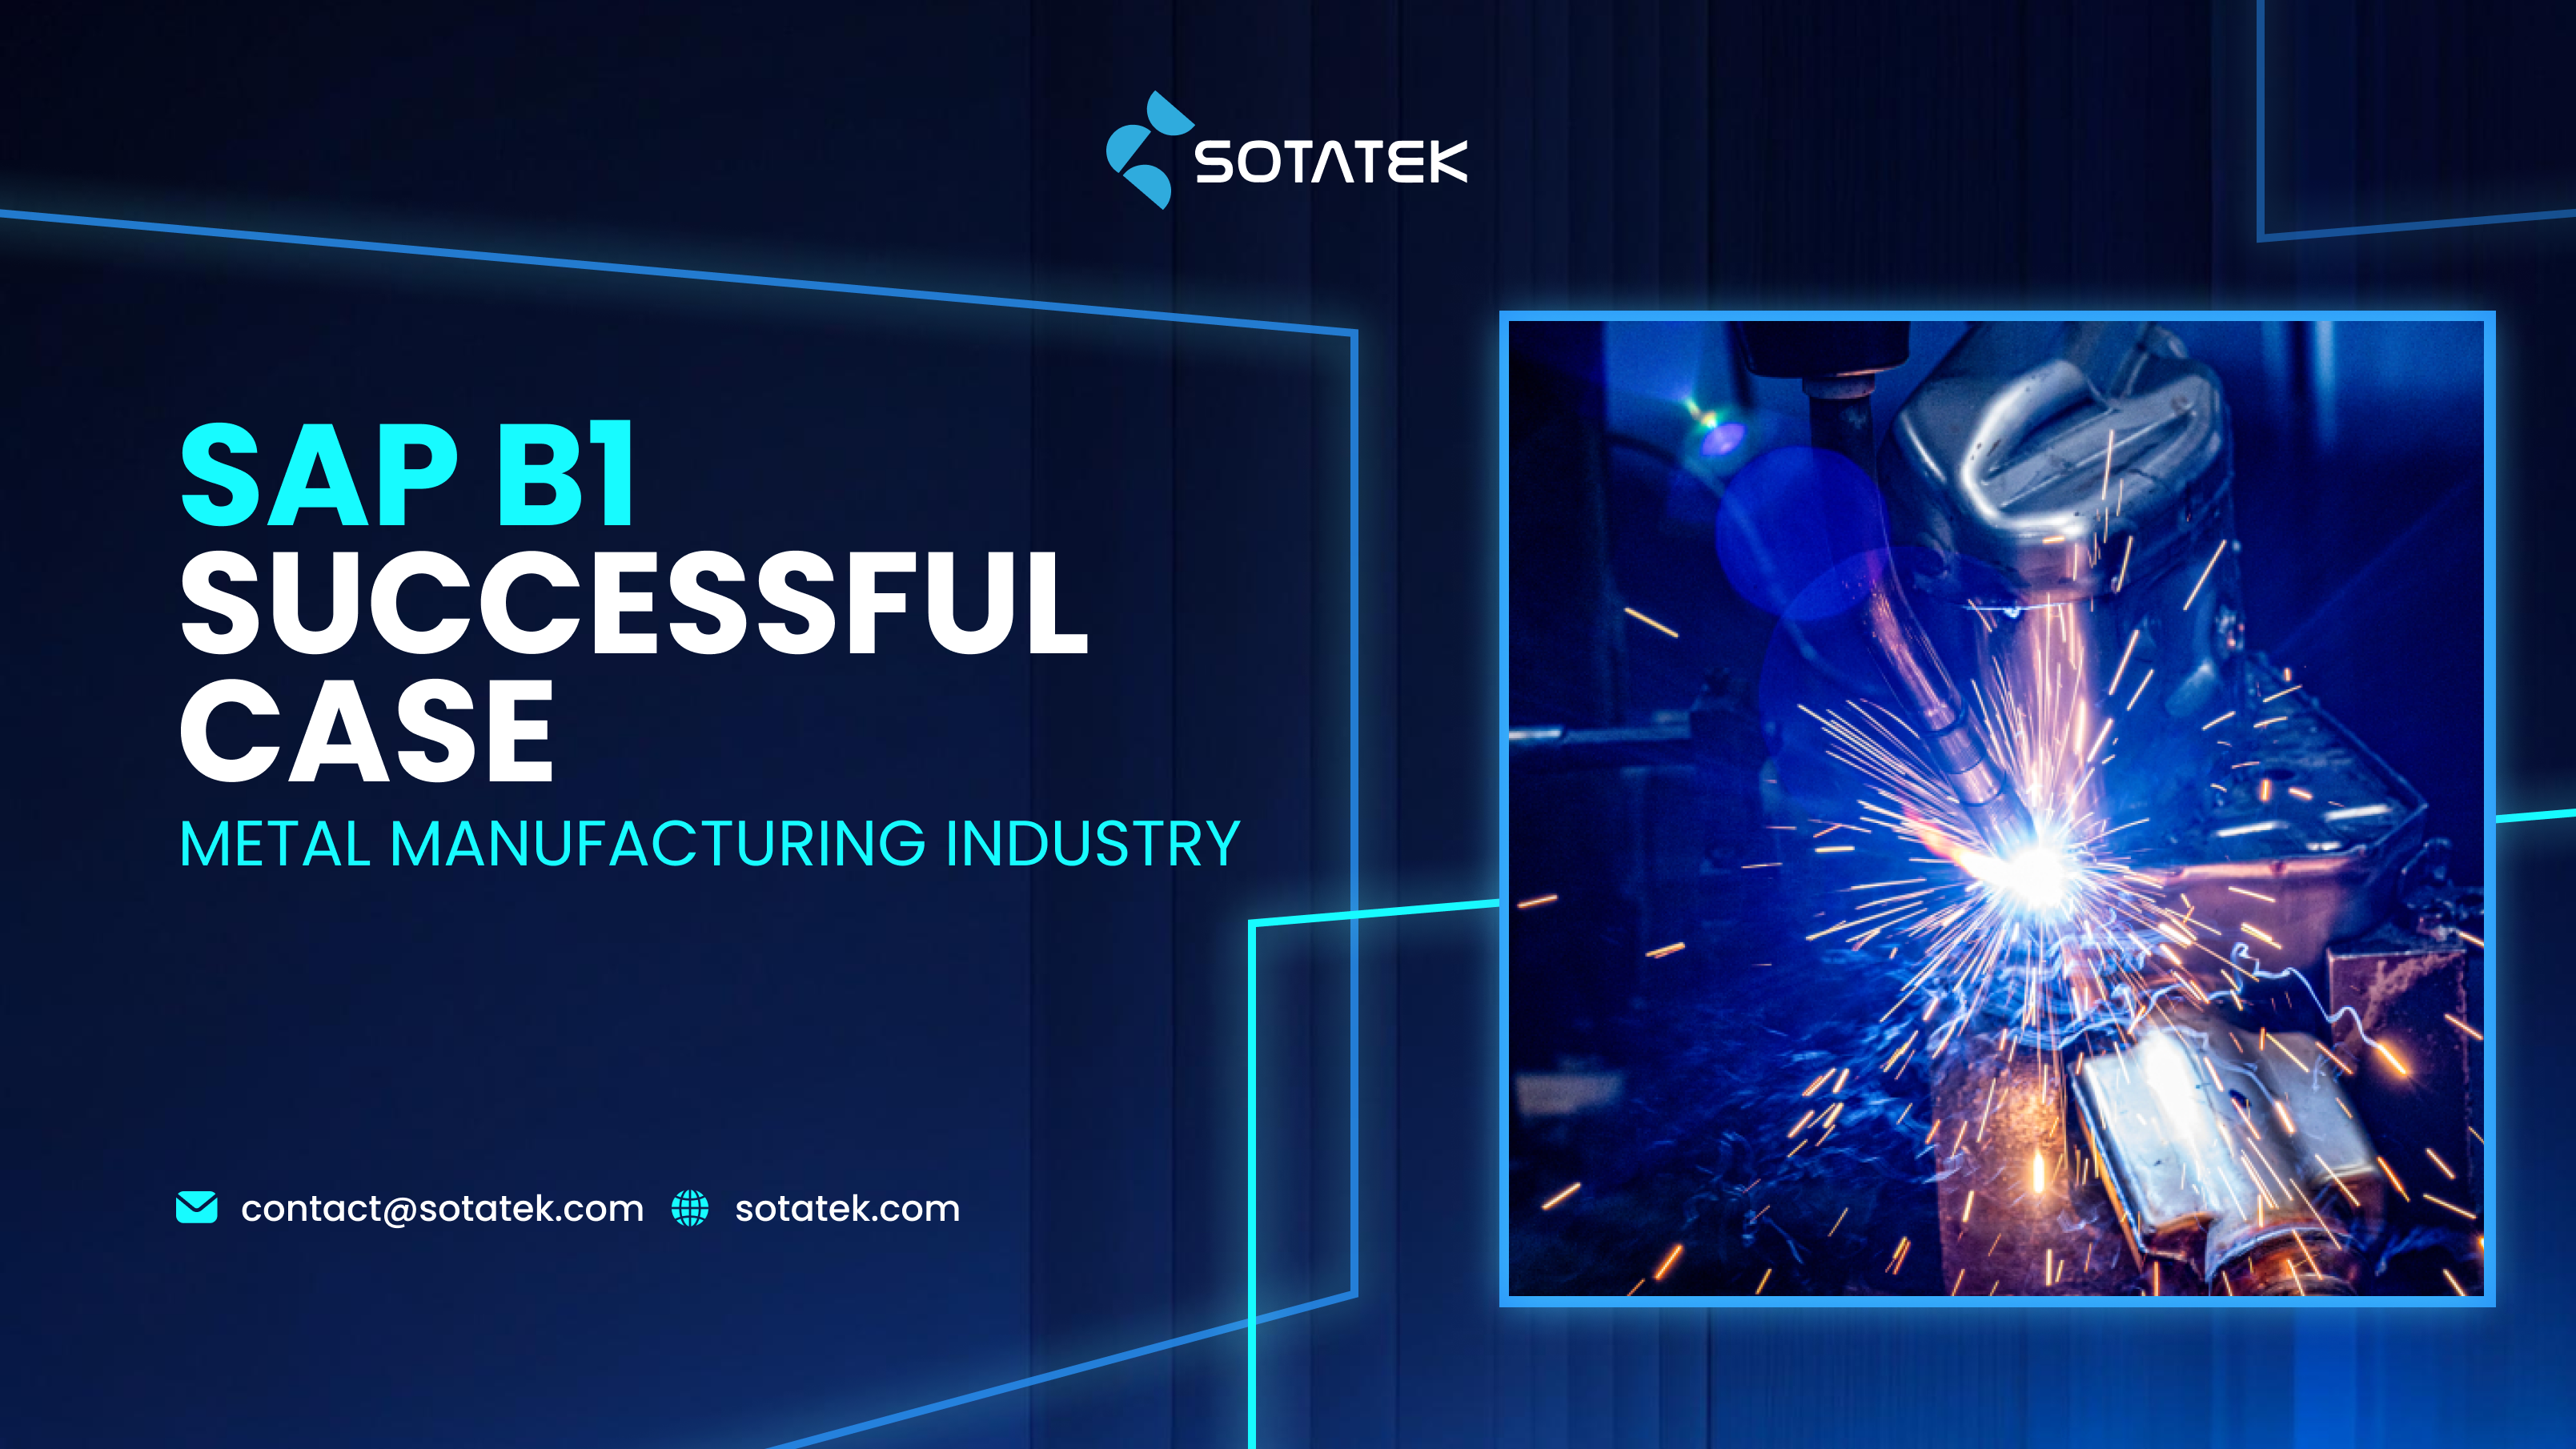 Driving Manufacturing Excellence: SotaTek's Impact on L. Group's SAP Project